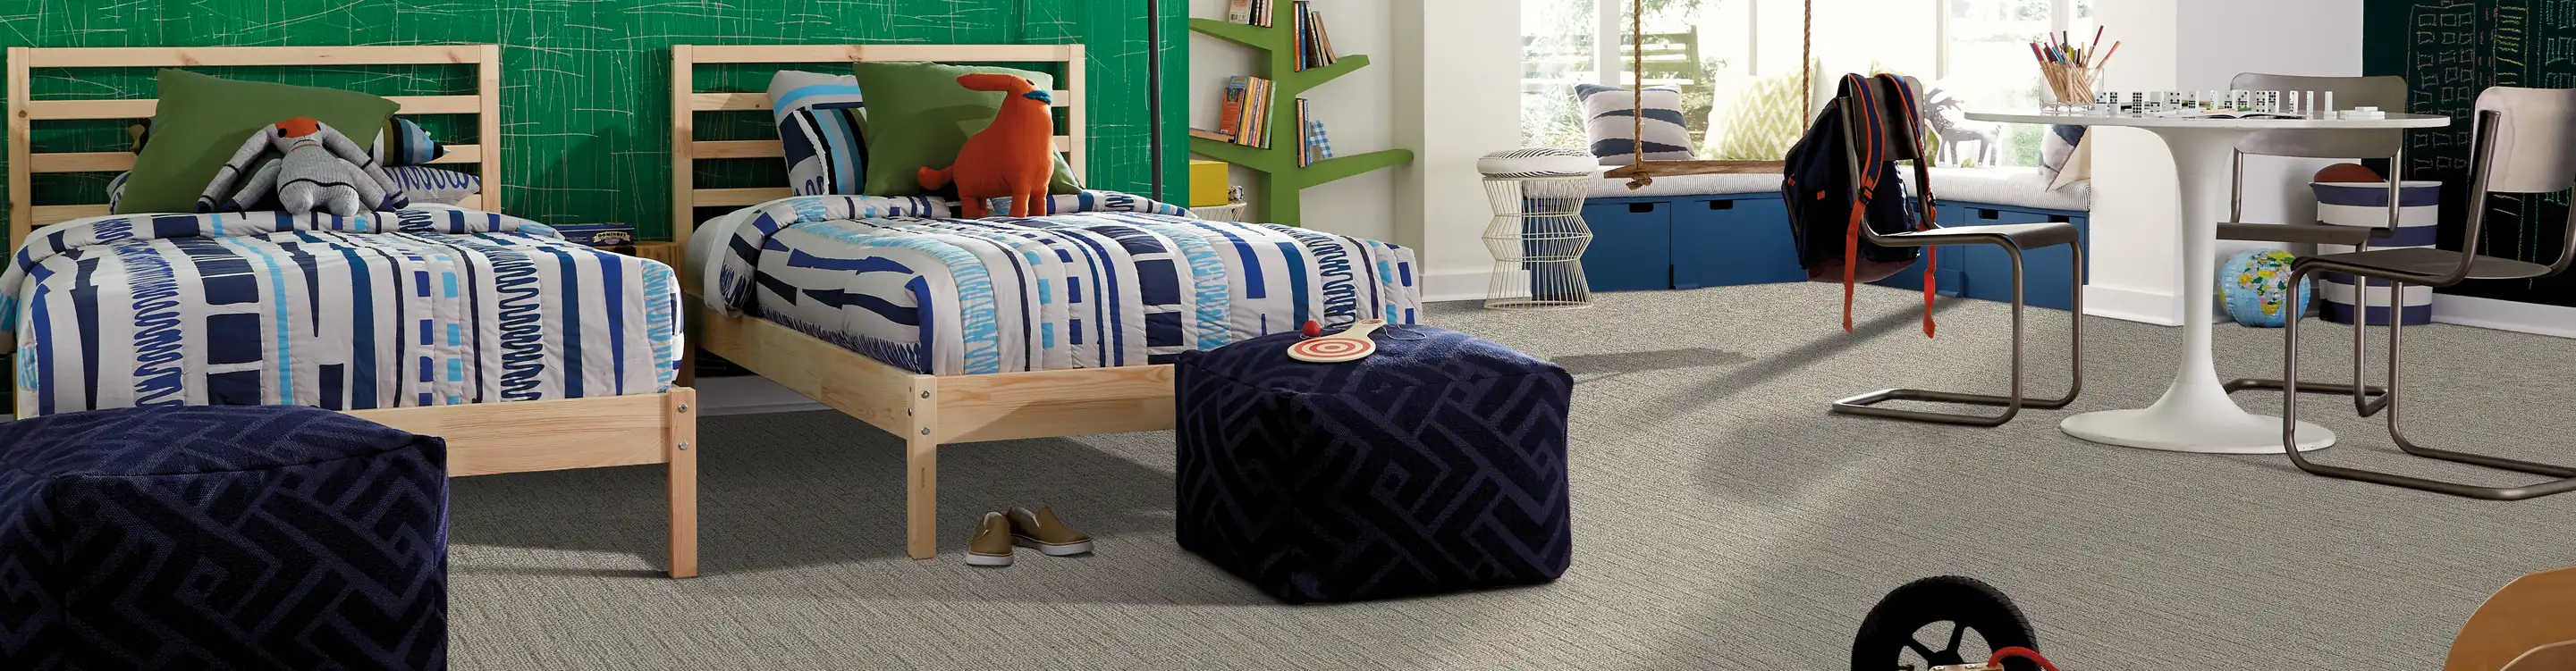 Colorful area rug with double twin beds. 